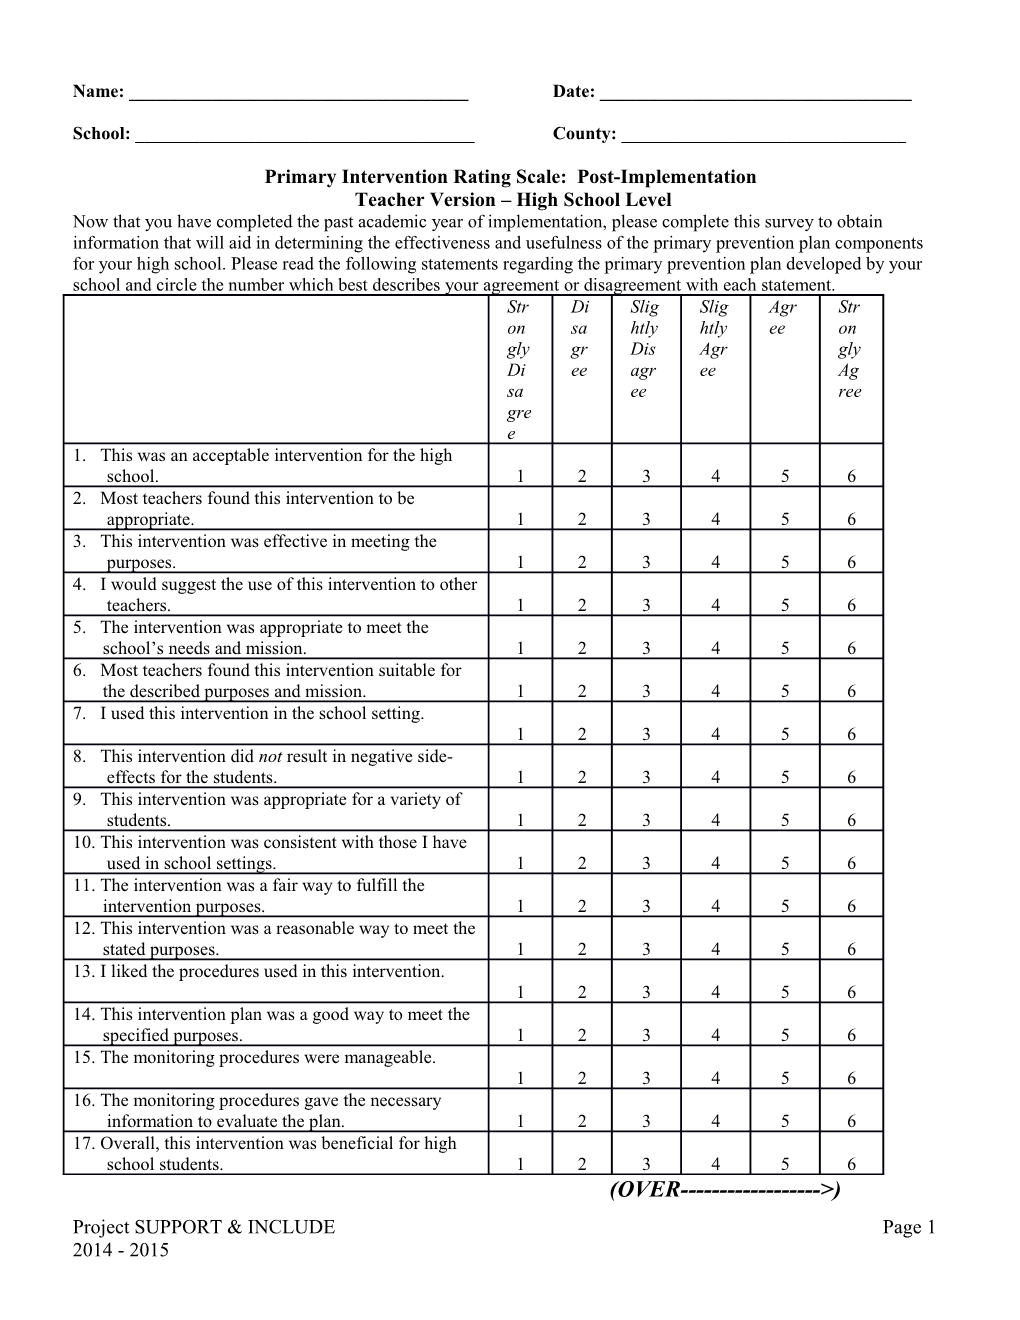 Primary Intervention Rating Scale: Post-Implementation